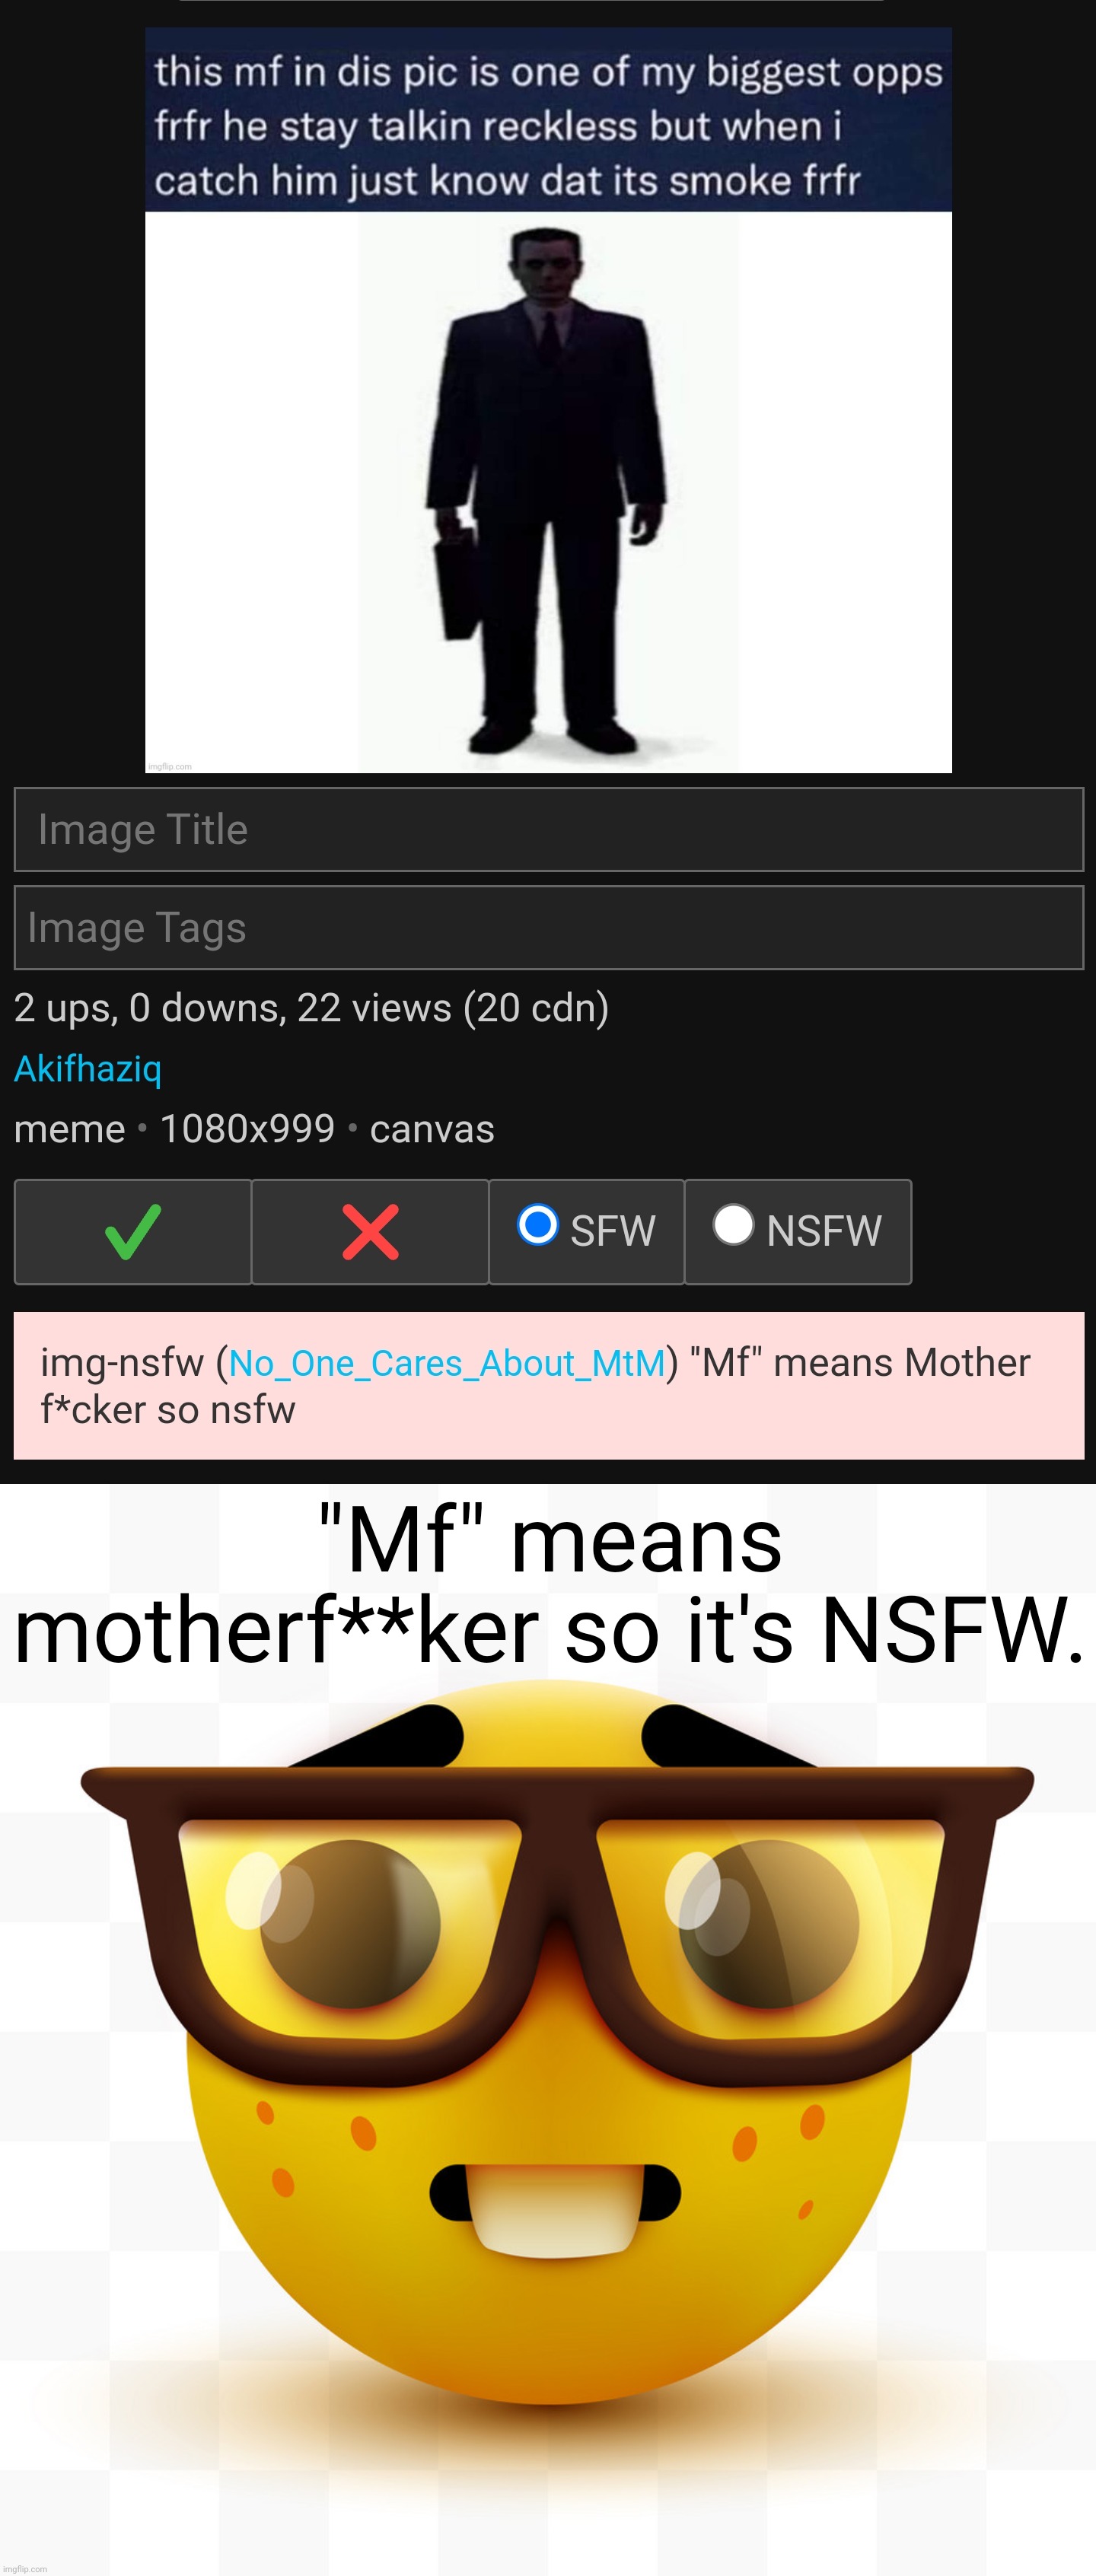 nsfw meaning - Imgflip